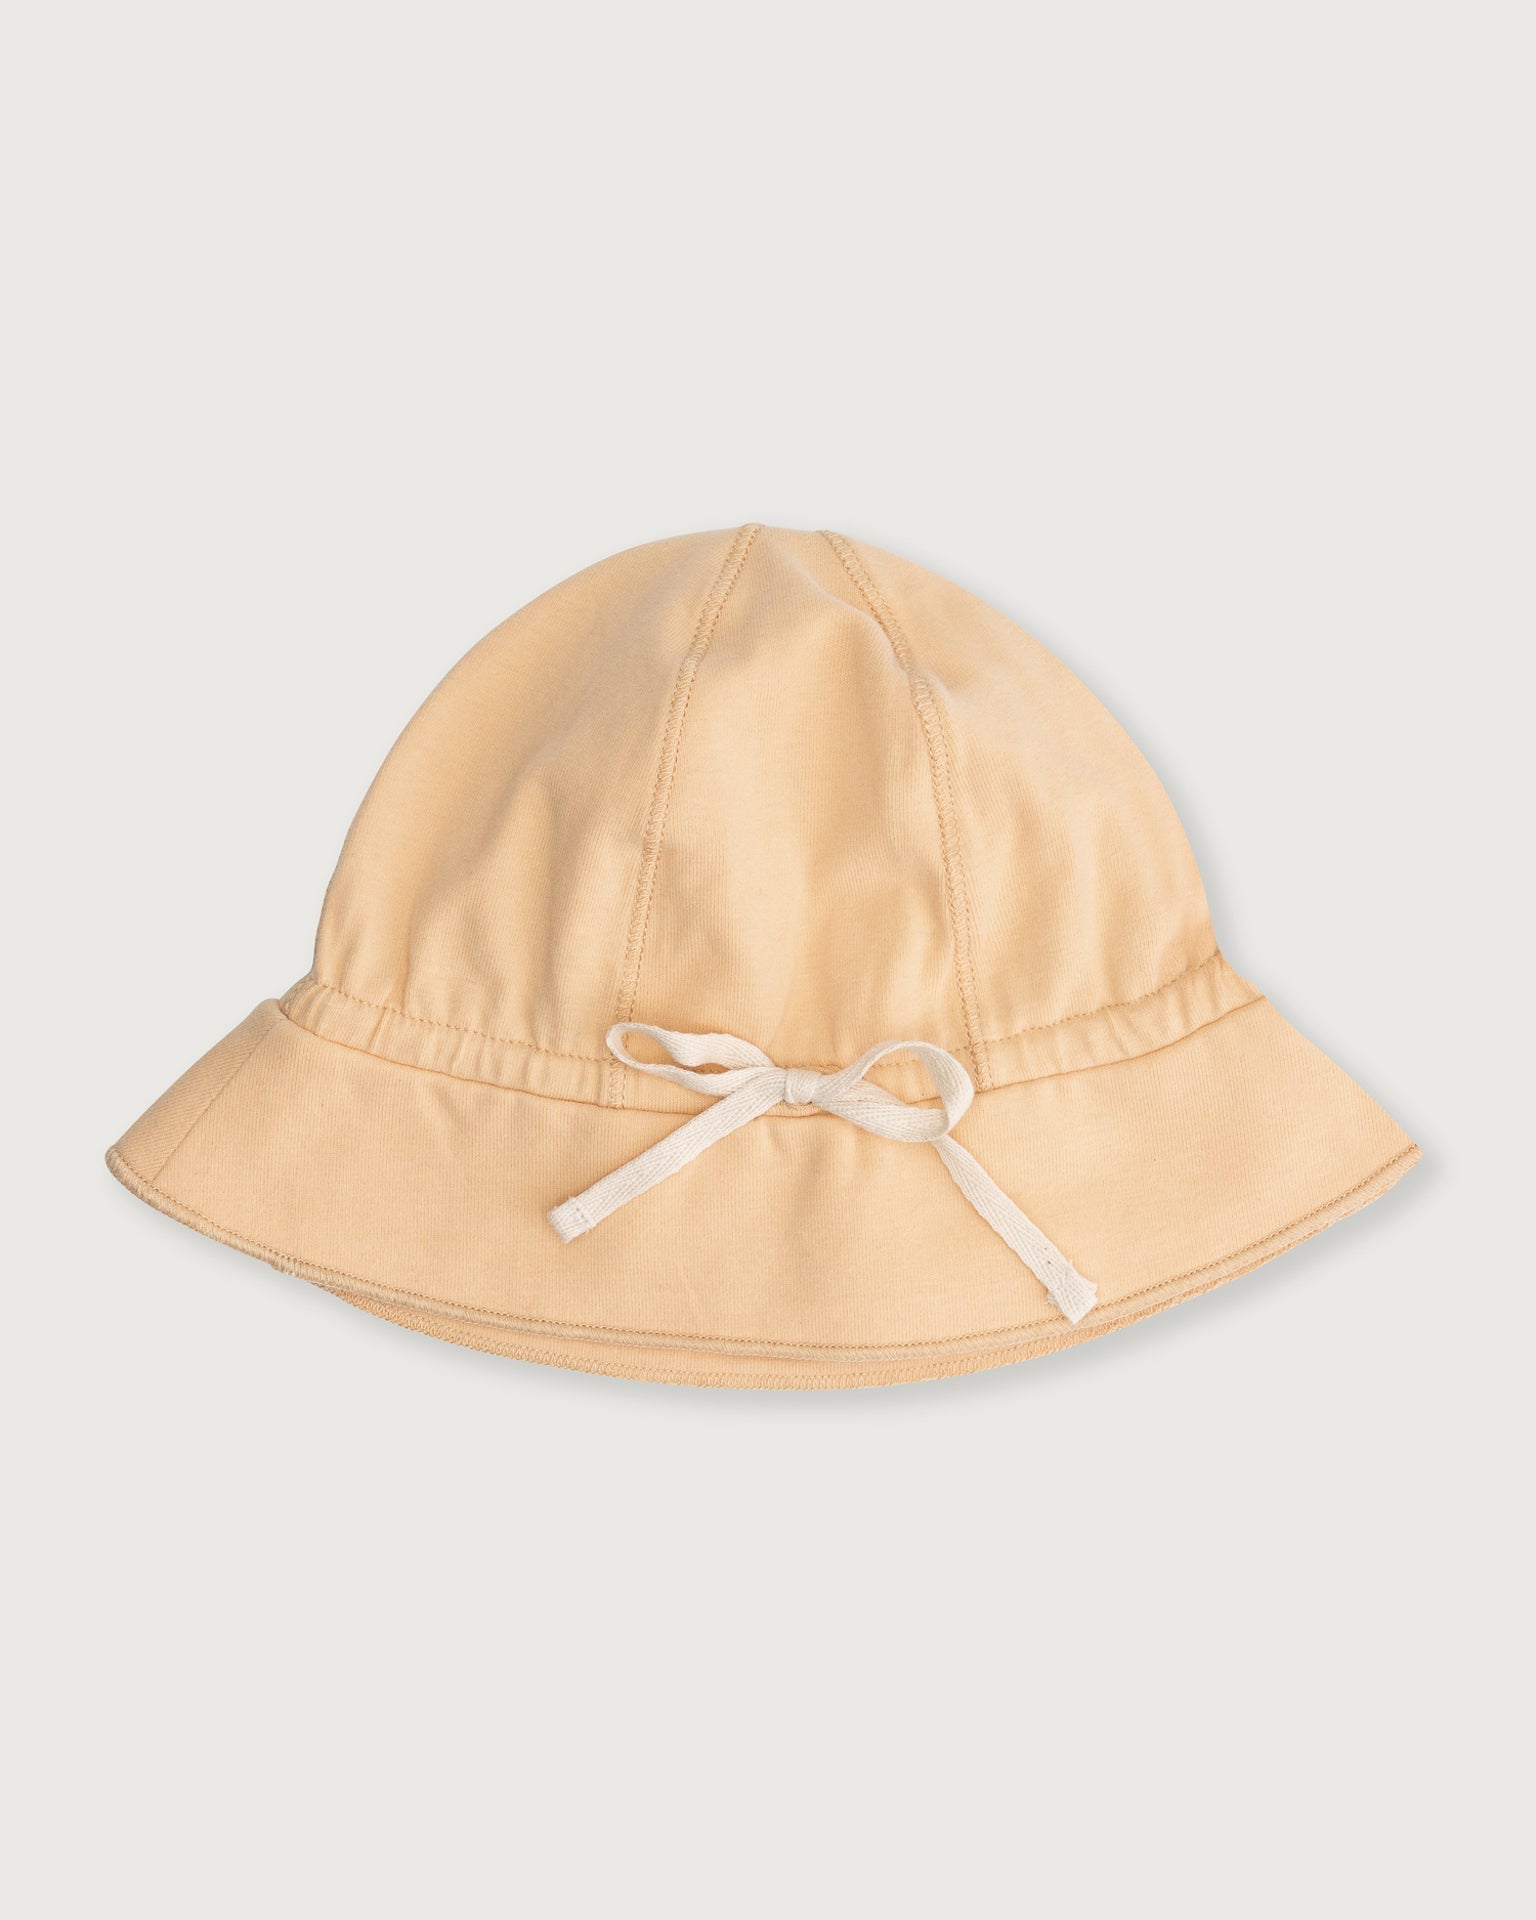 Little gray label baby accessories baby sun hat in apricot